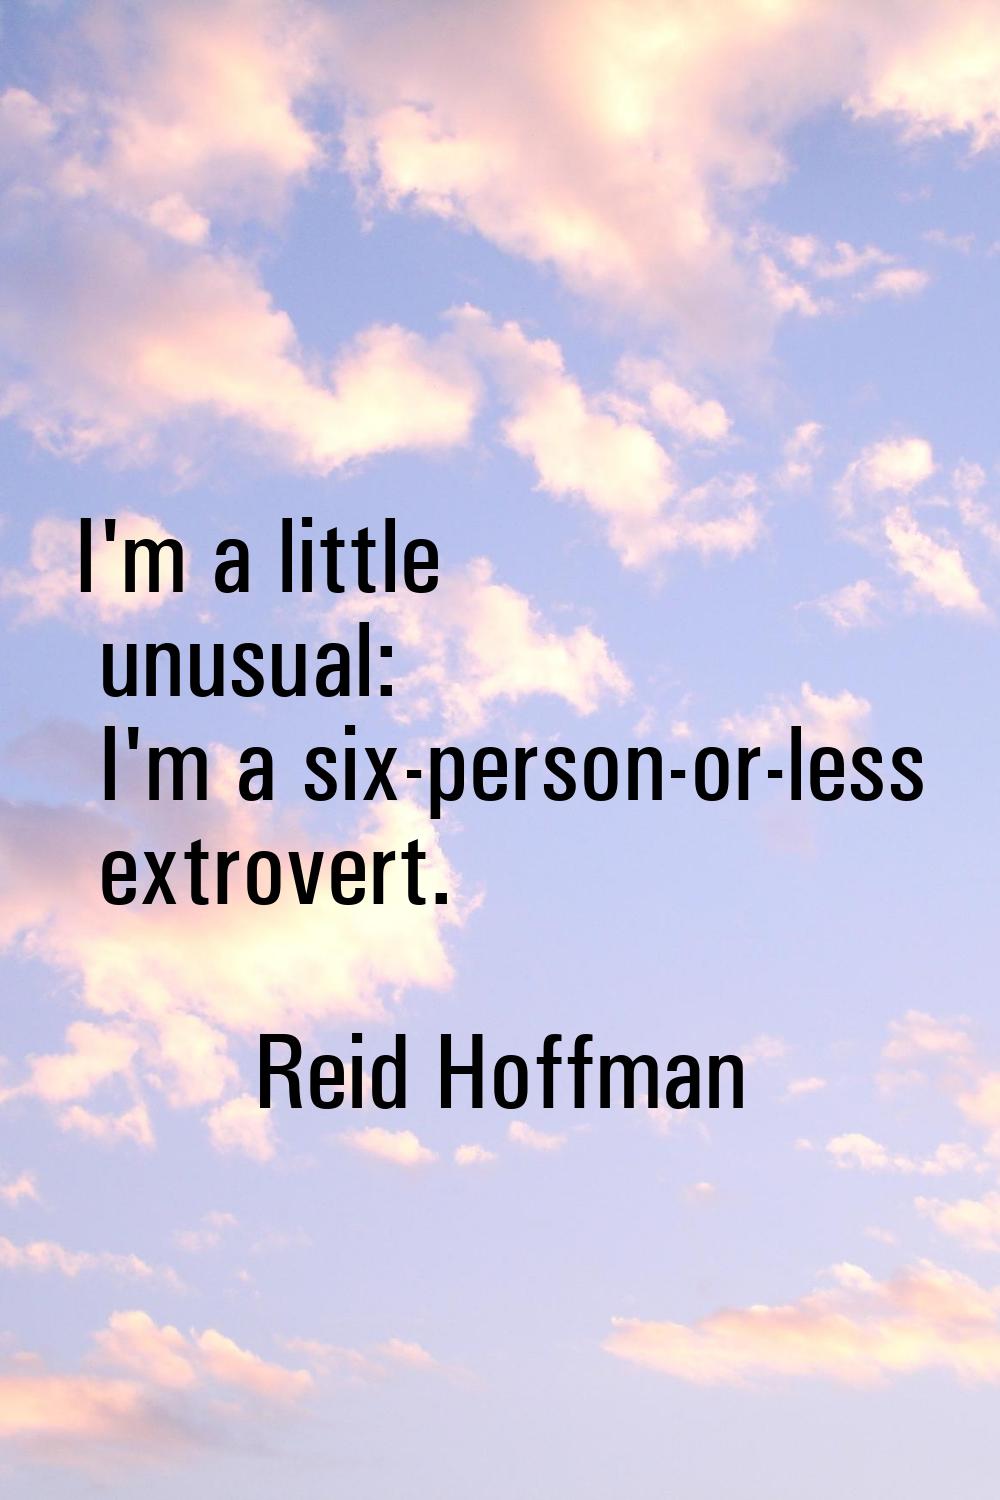 I'm a little unusual: I'm a six-person-or-less extrovert.